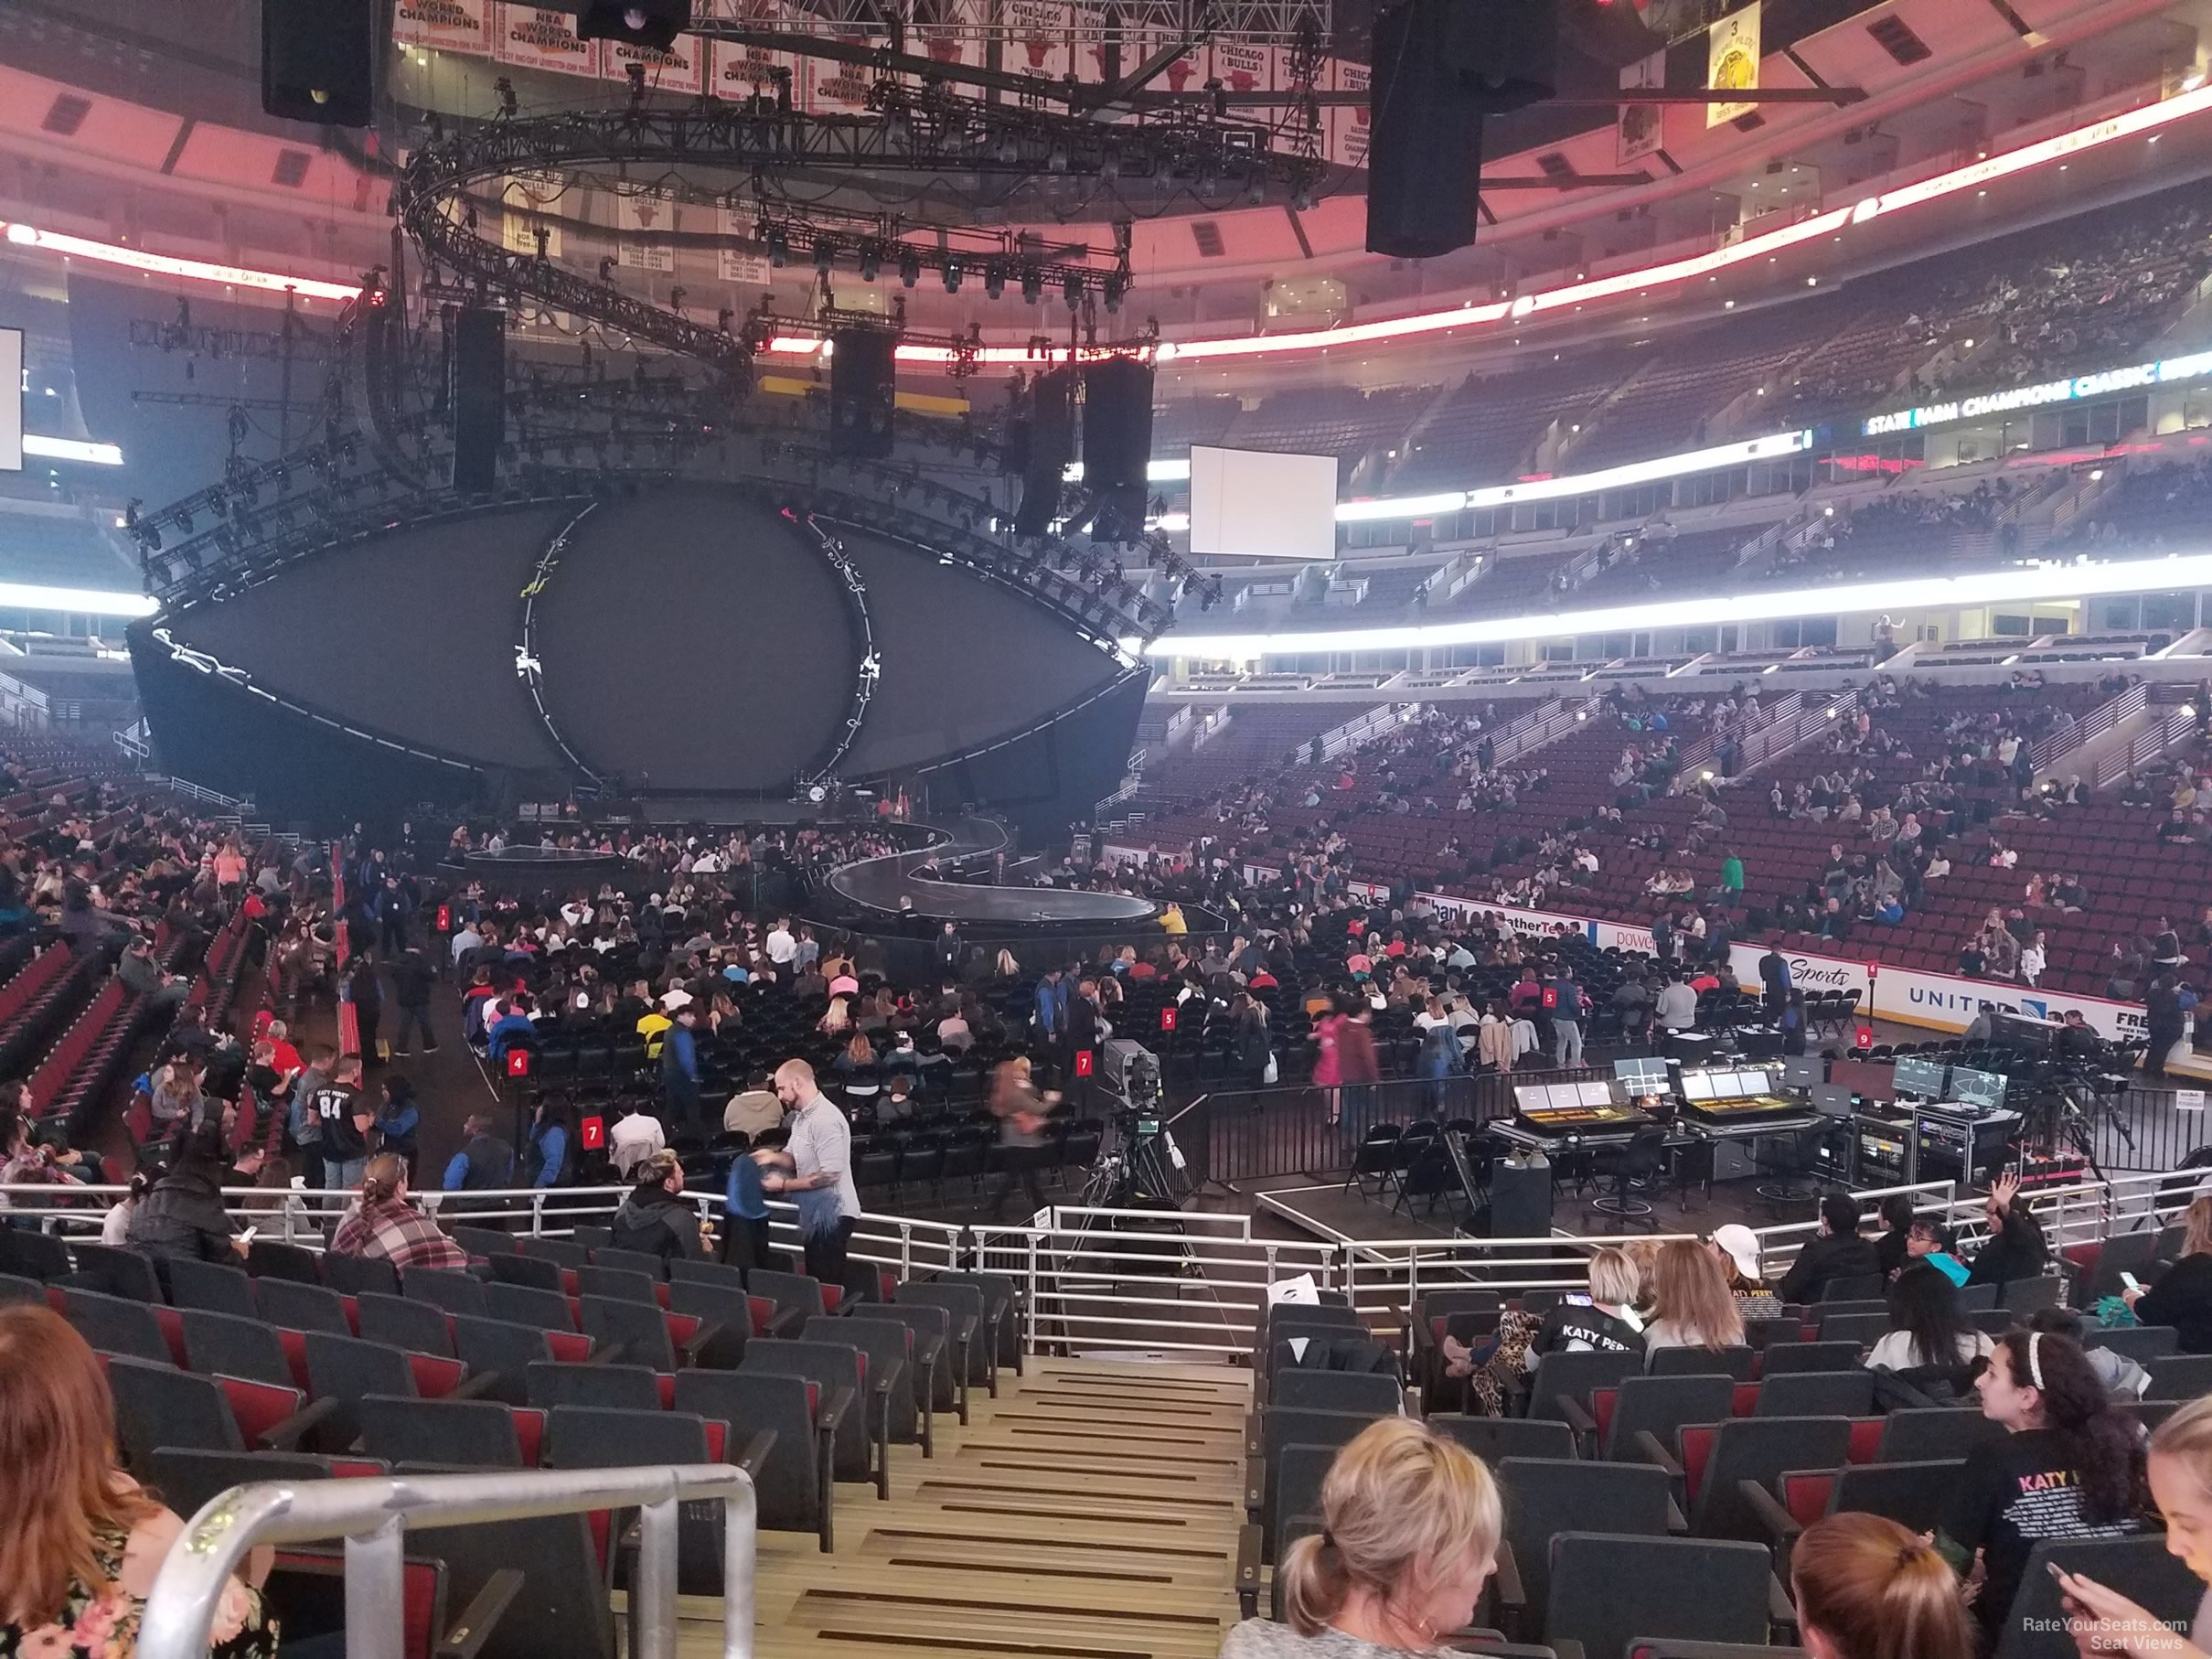 section 107, row 12 seat view  for concert - united center